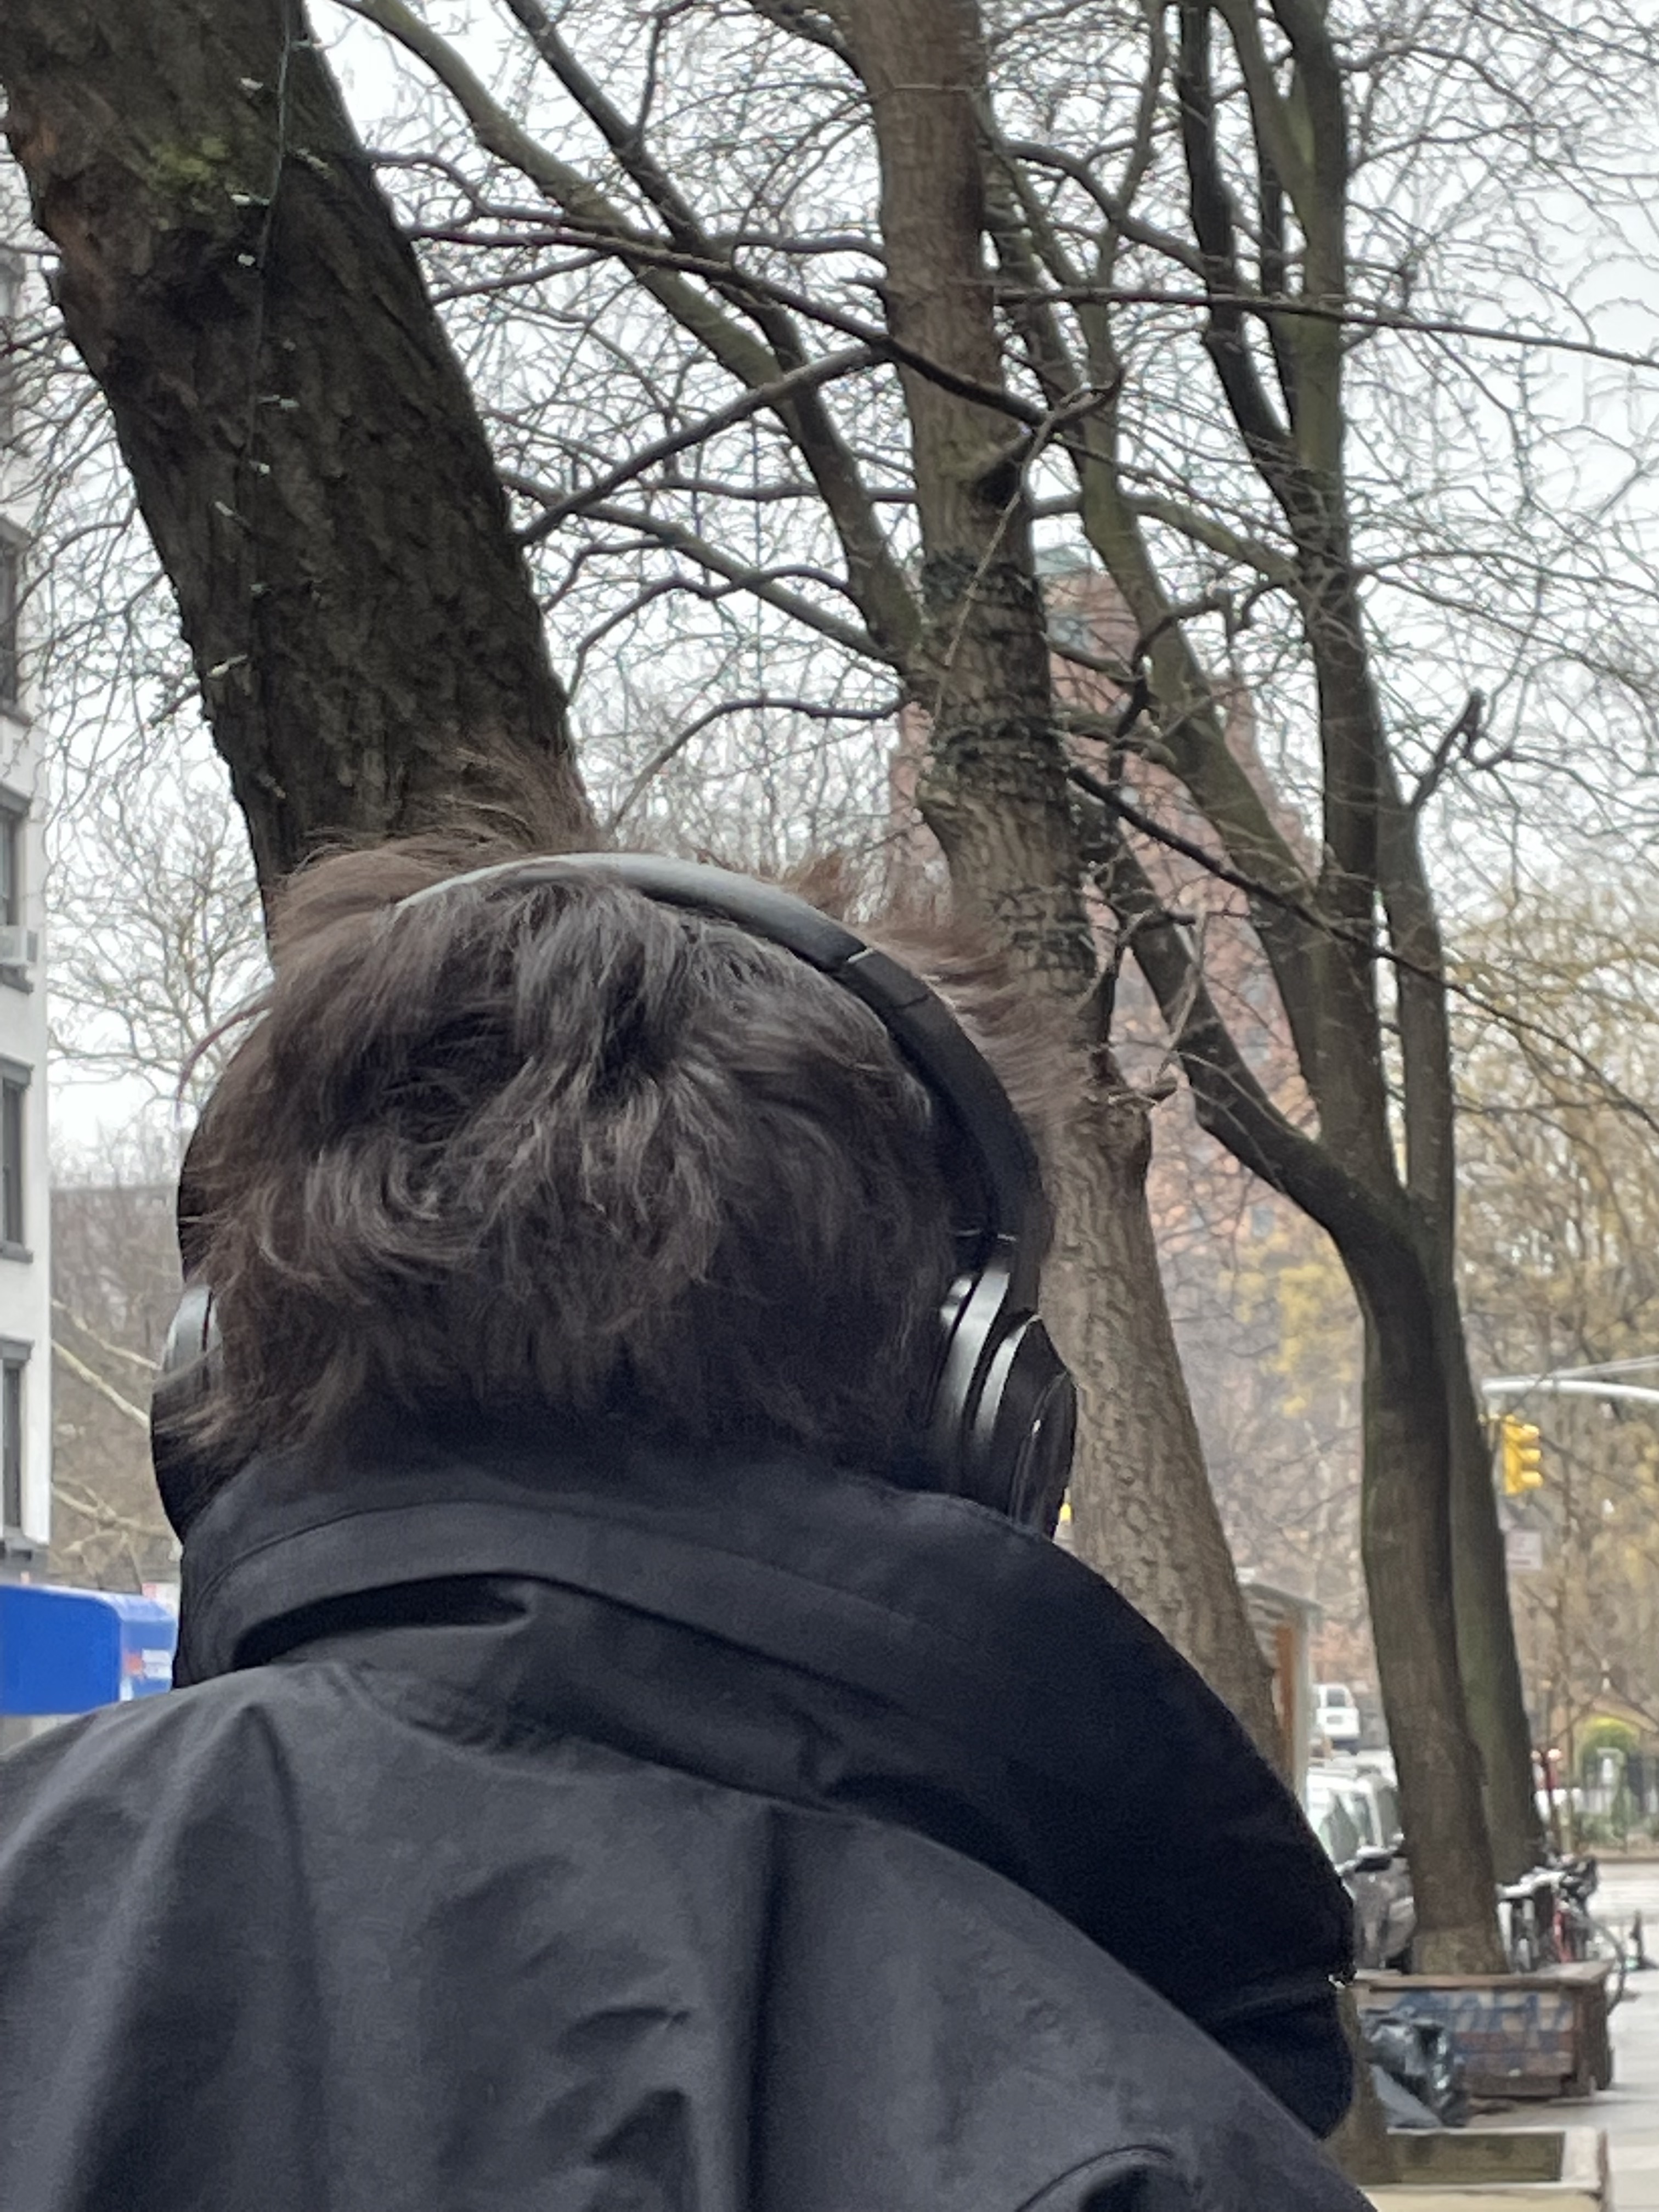 Old lady with headphones